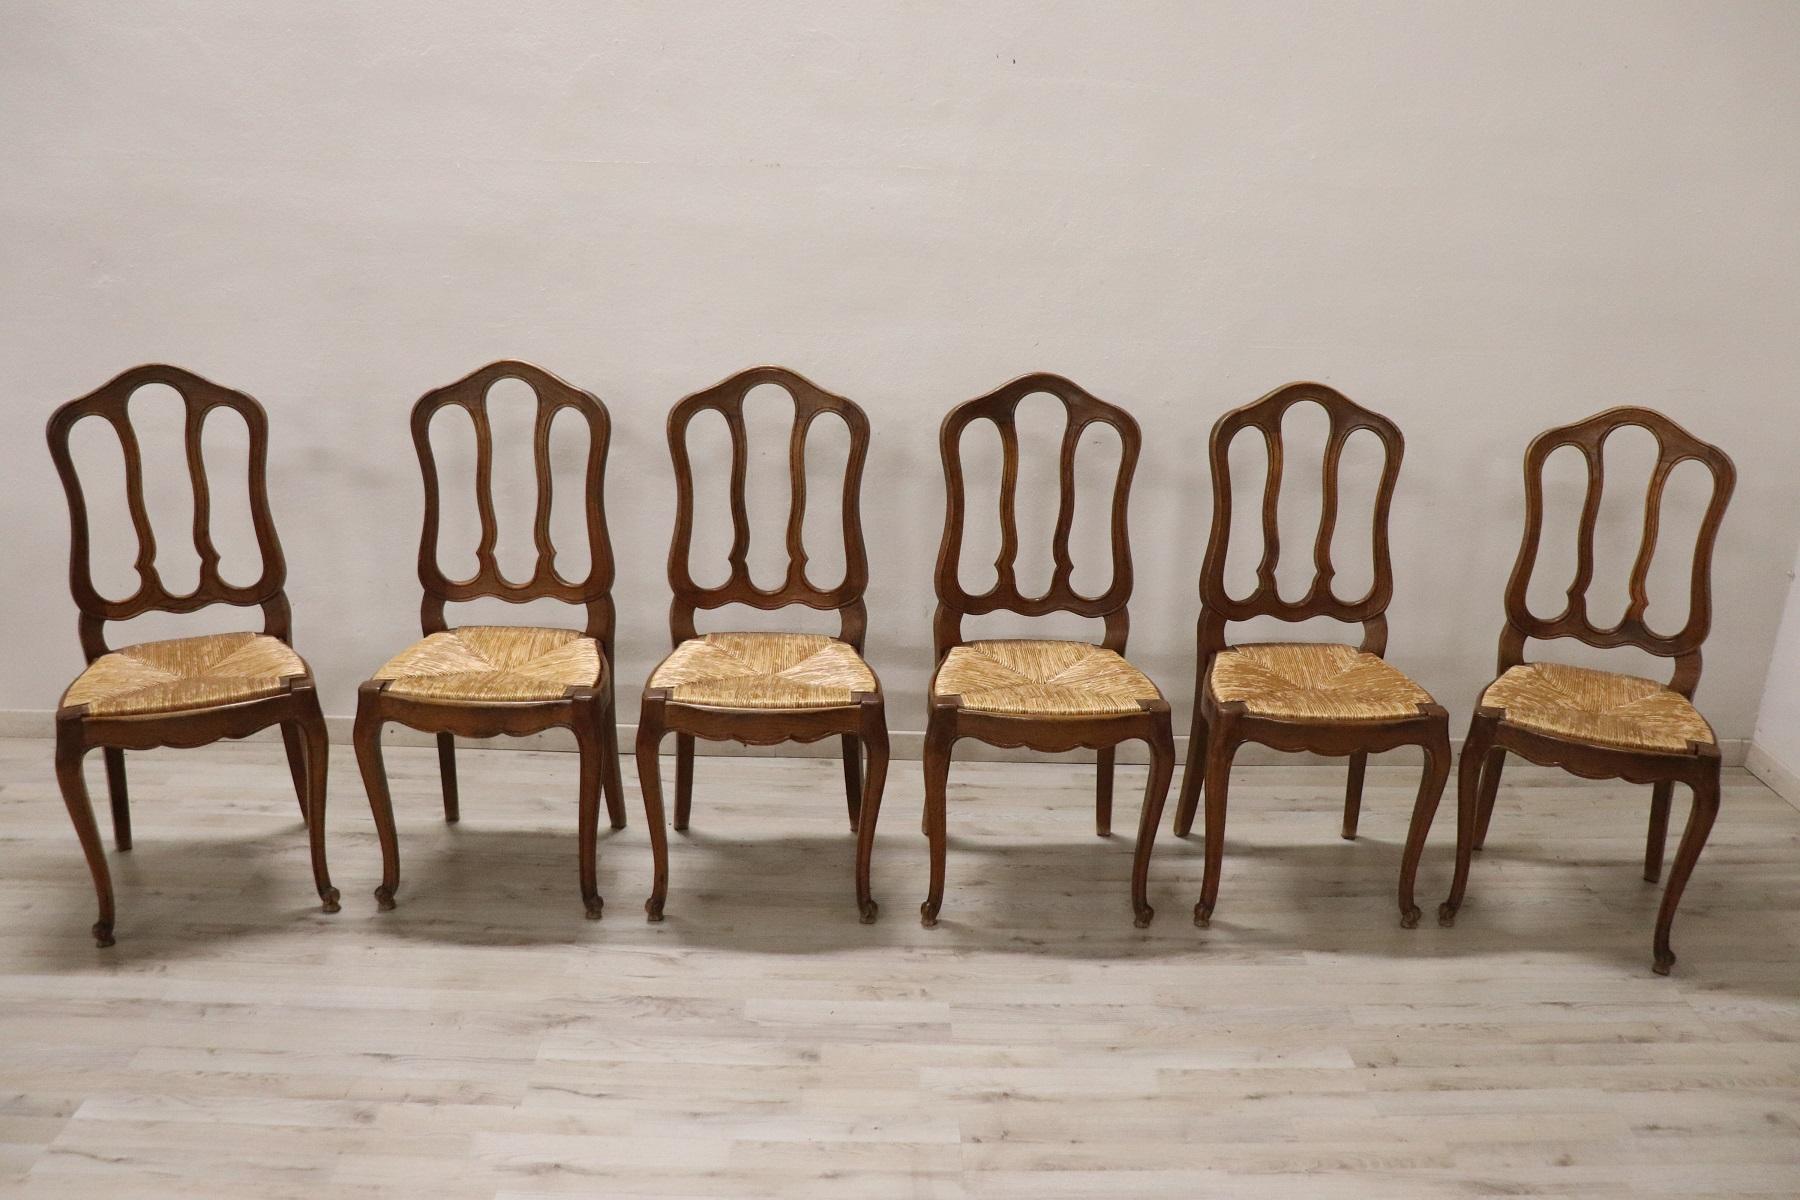 20th century Italian classical style dining room set of six chairs in solid chestnut wood. The chairs are very elegant with very slender and solid moving legs. The seat is wide and comfortable in rustic straw. The chairs are in perfect condition